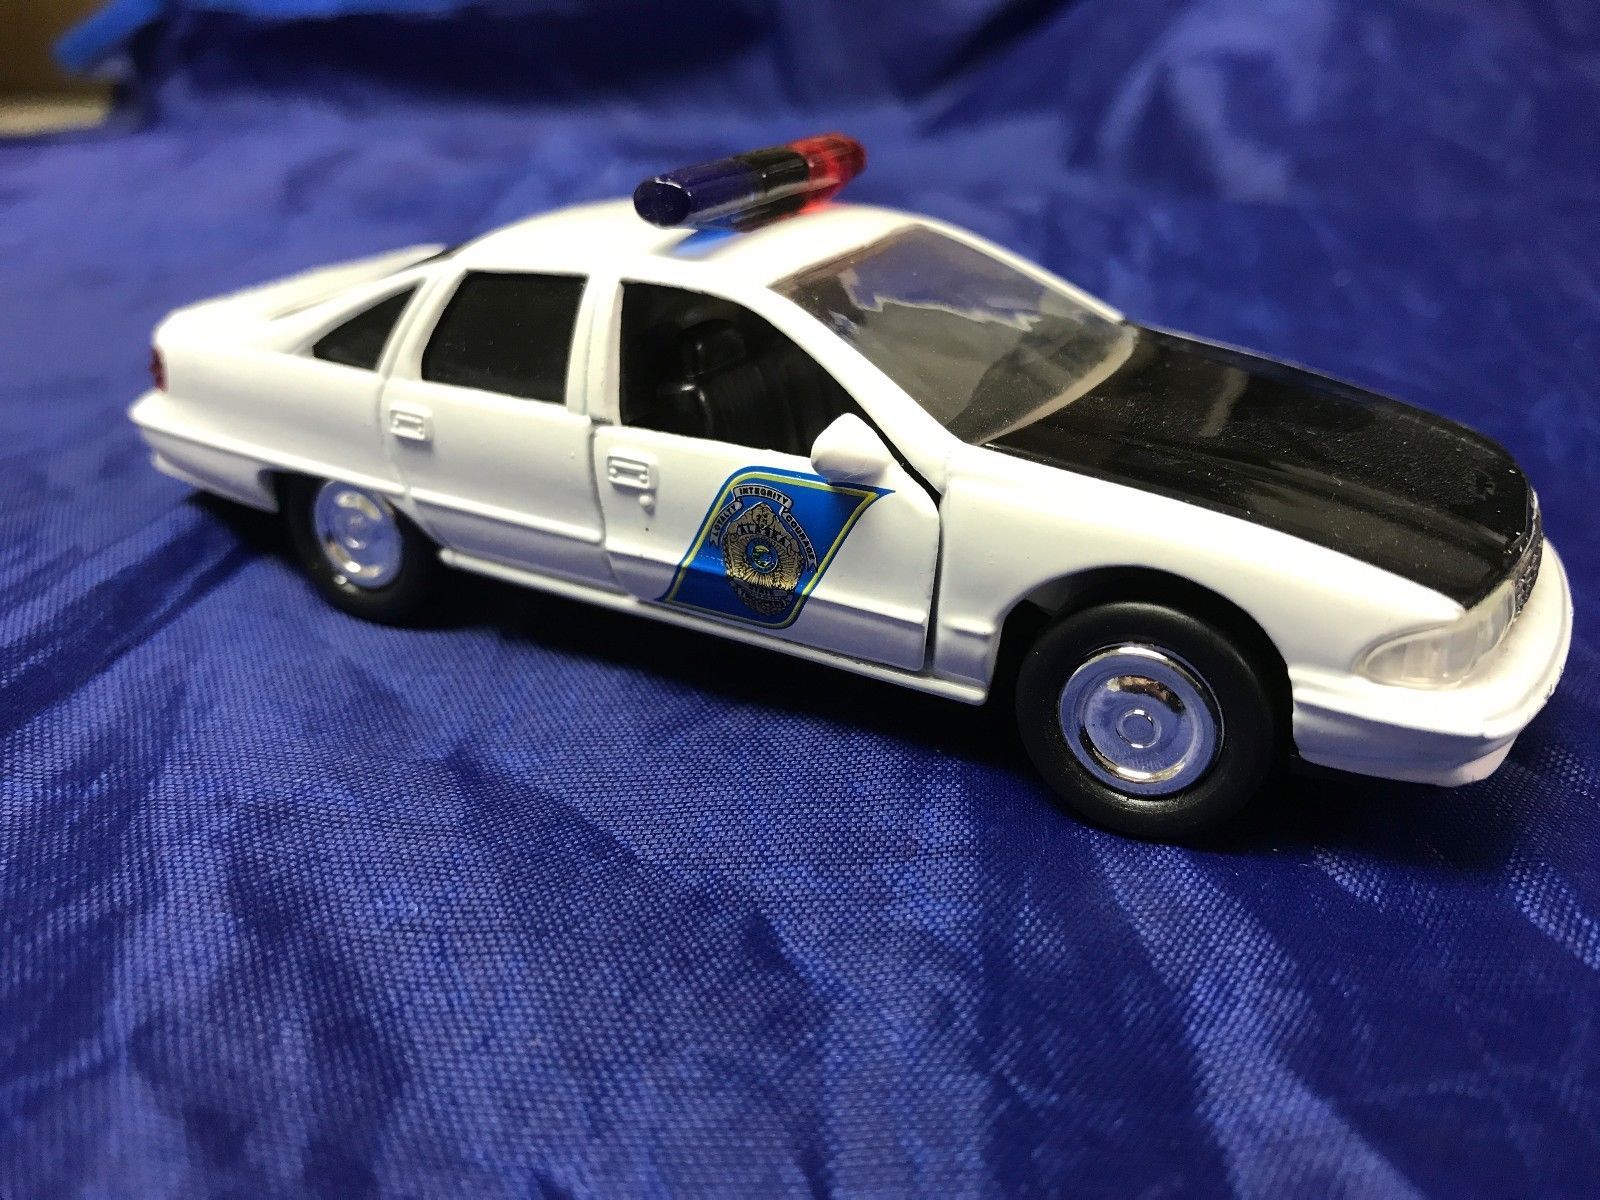 Road Champs 1:43 Scale 1996 Police Series Chevry Caprice VERMONT STATE POLICE 